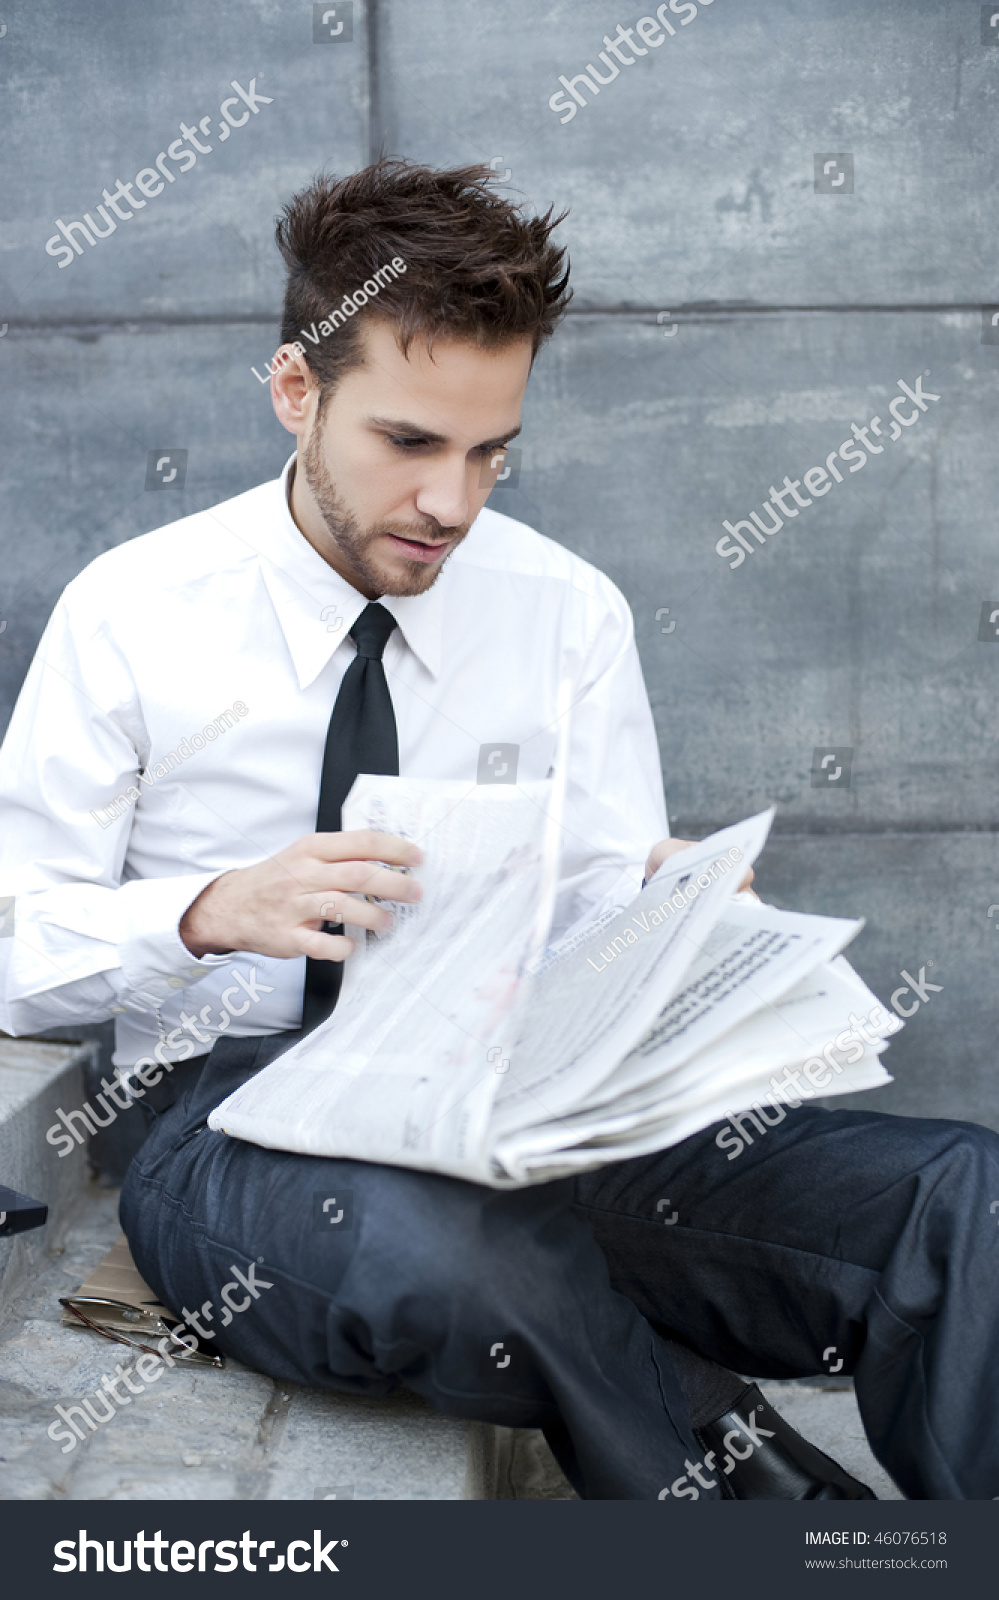 Young Handsome Man Reading Newspaper Stock Photo 46076518 : Shutterstock